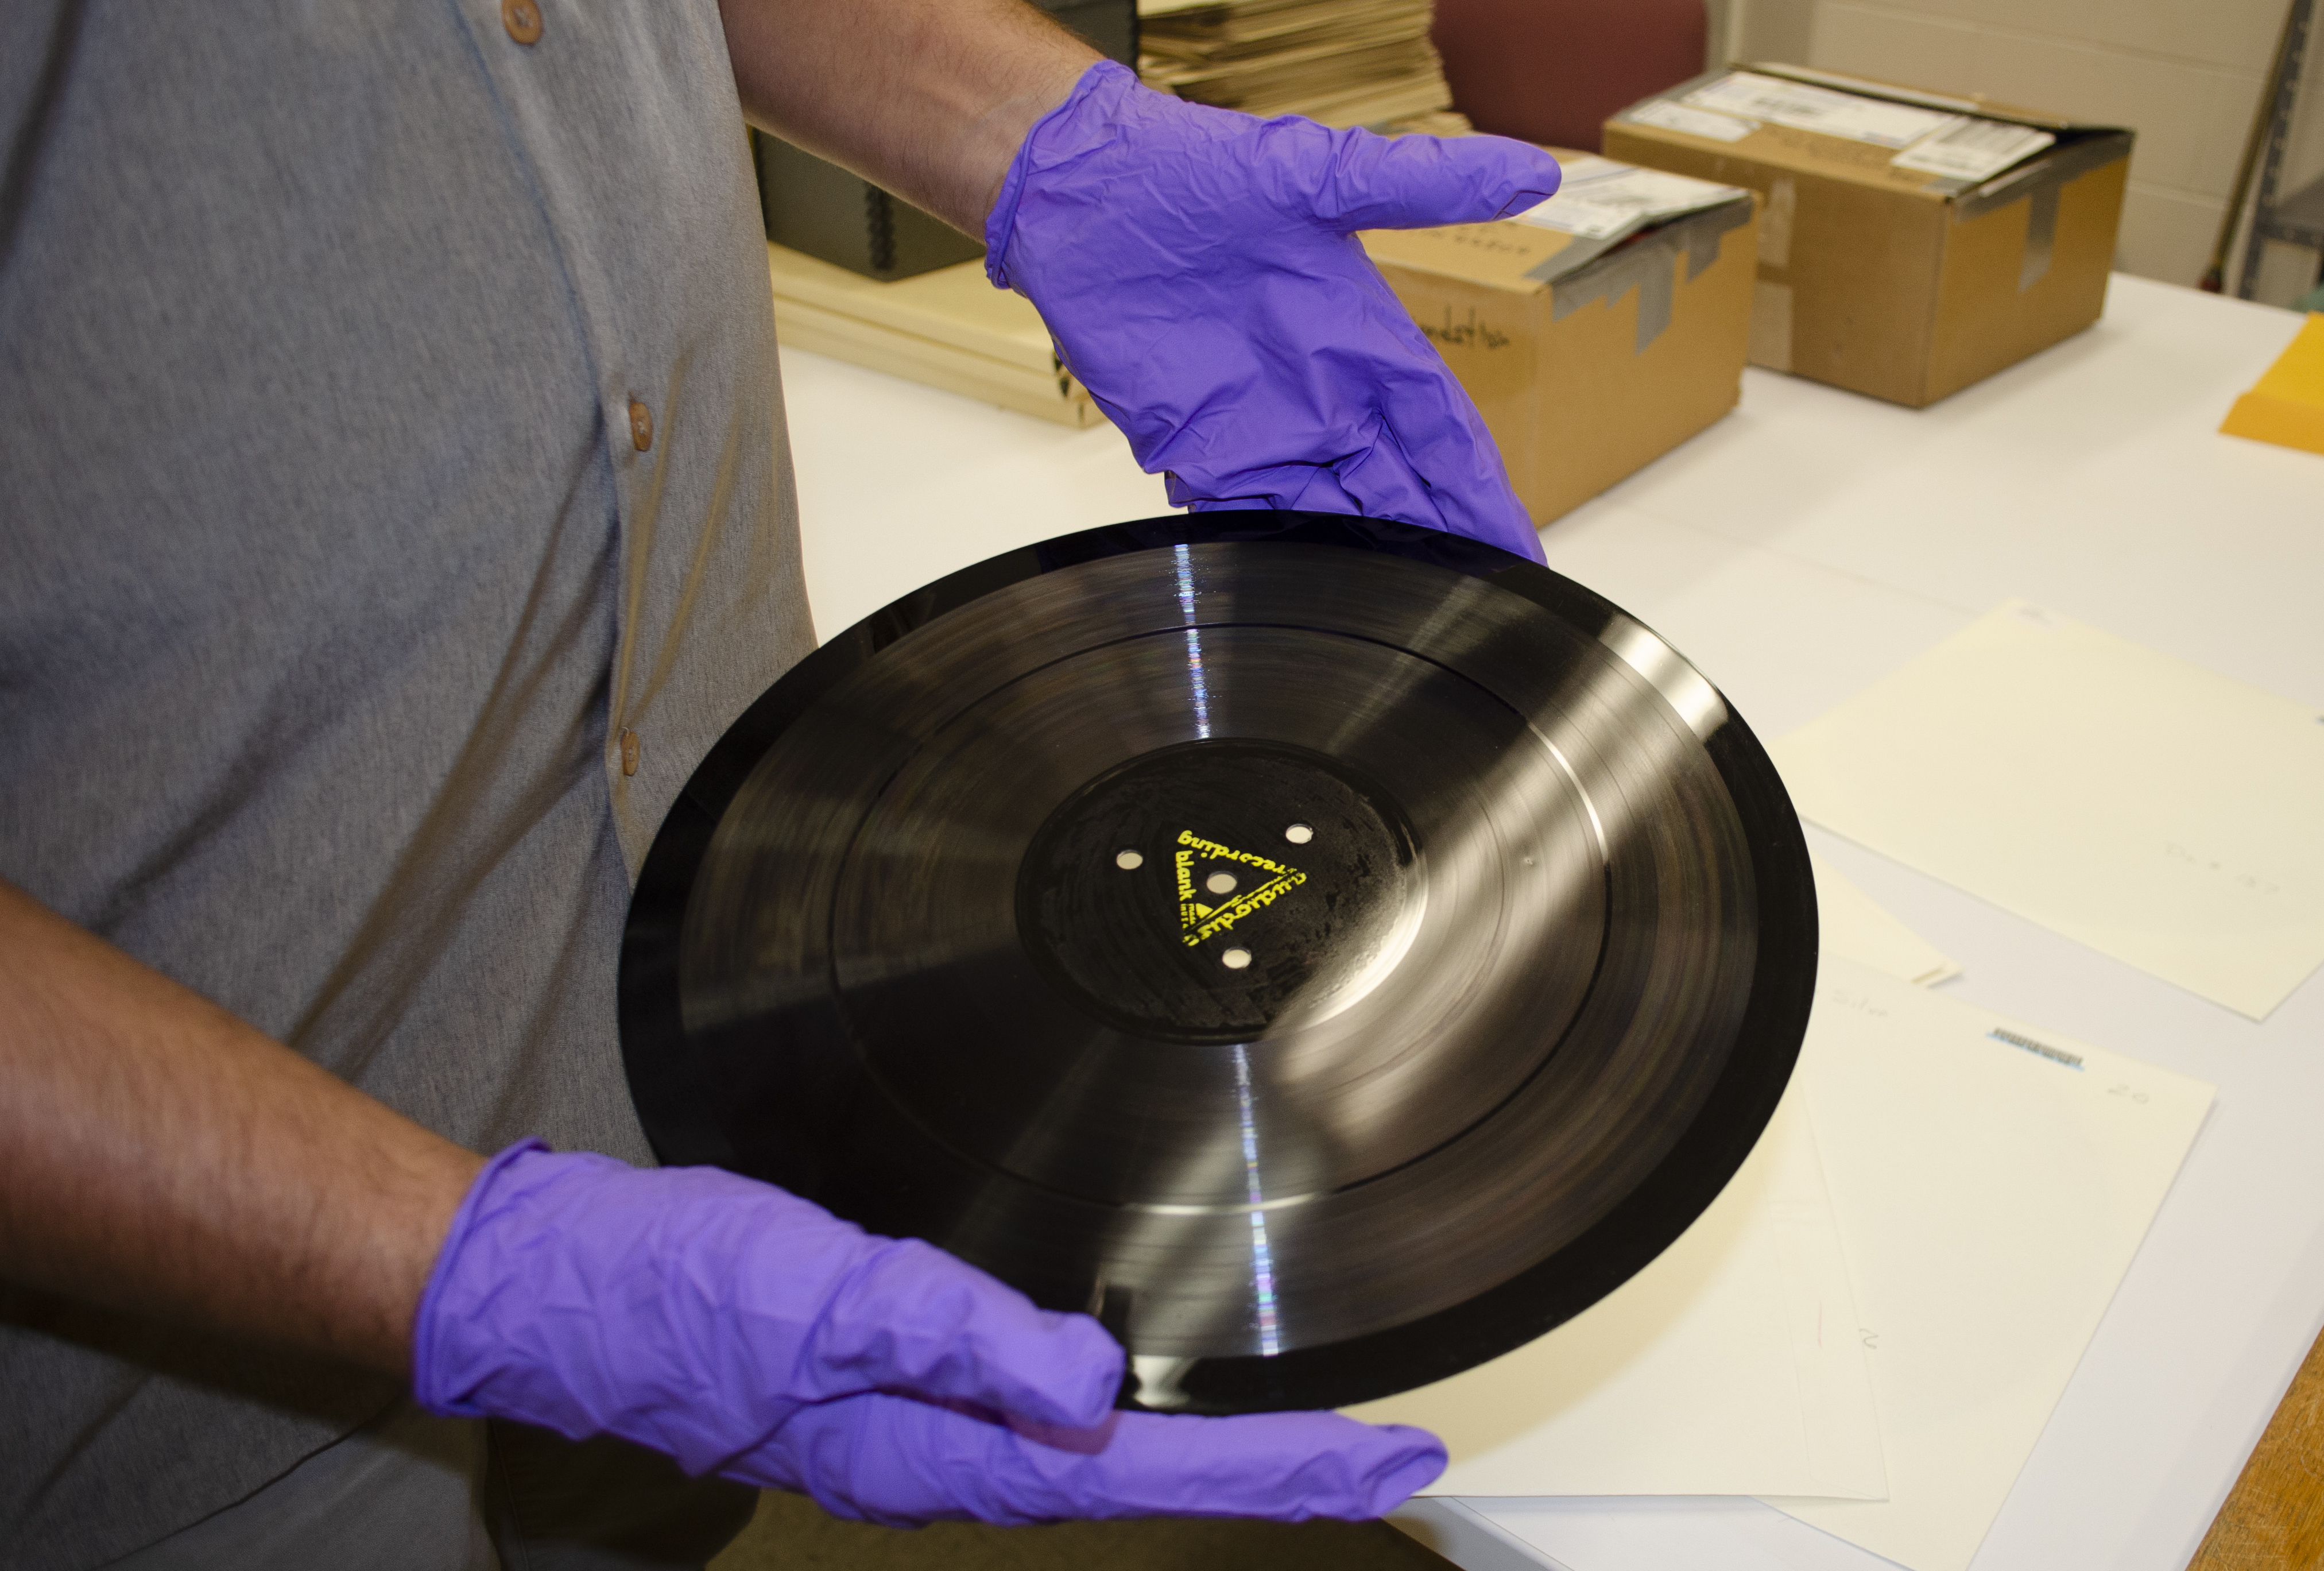 Hands with purple gloves hold a disc recording from the Archives of Traditional Music